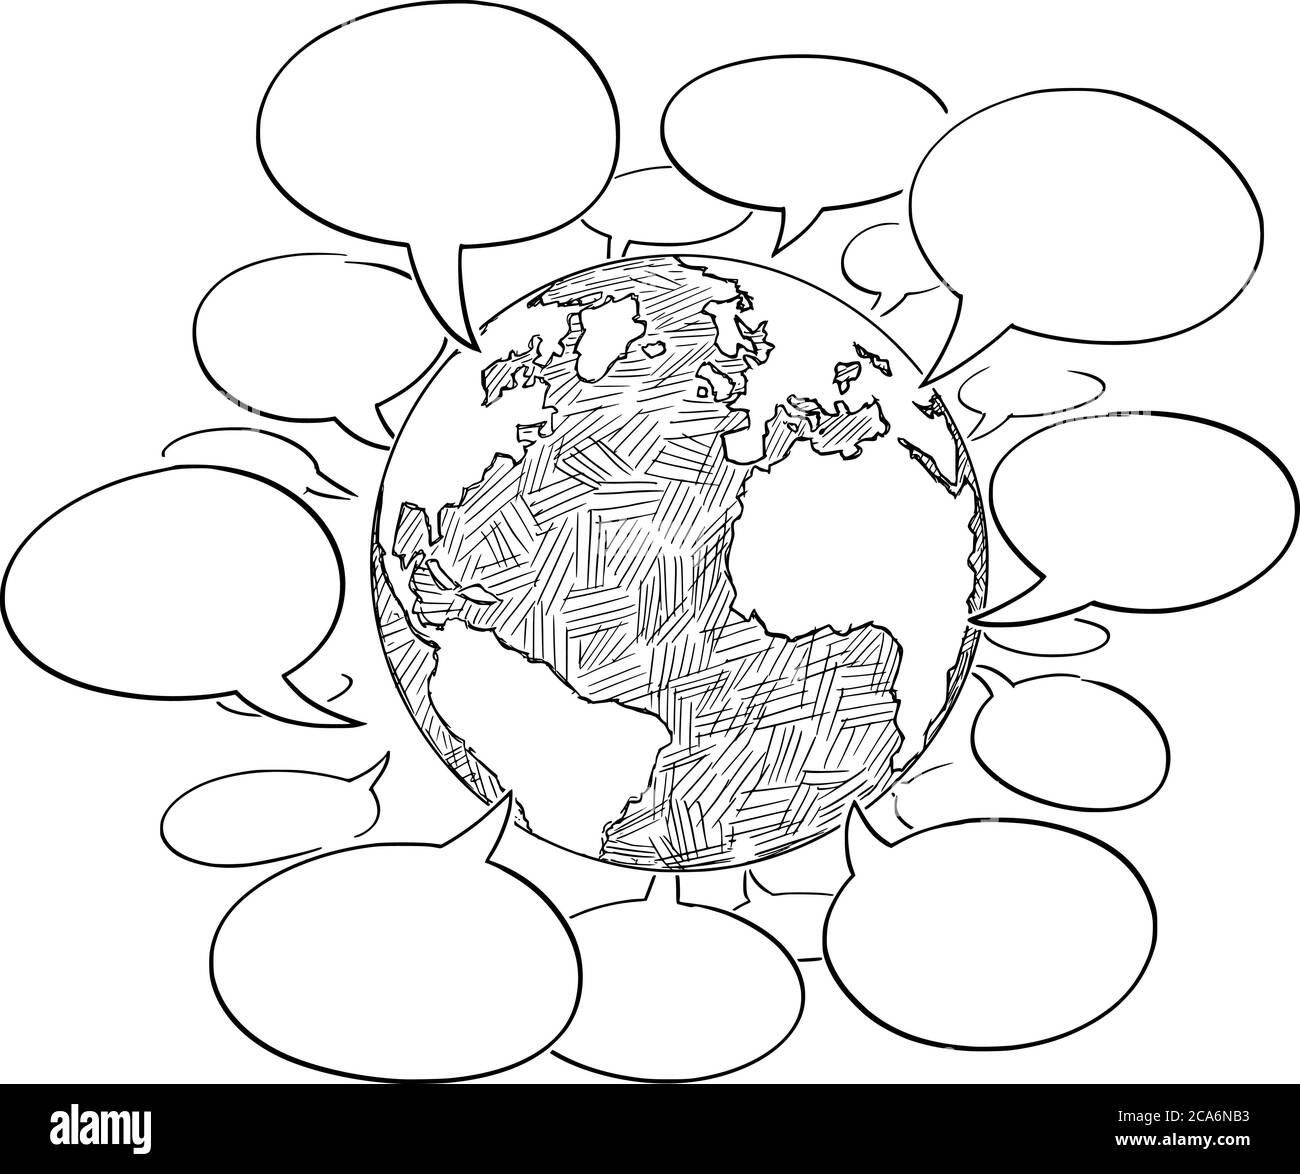 Vector cartoon drawing conceptual illustration of planet Earth Globe with empty speech, talk or Text Balloons or Bubbles. Concept of global communication around world. Stock Vector